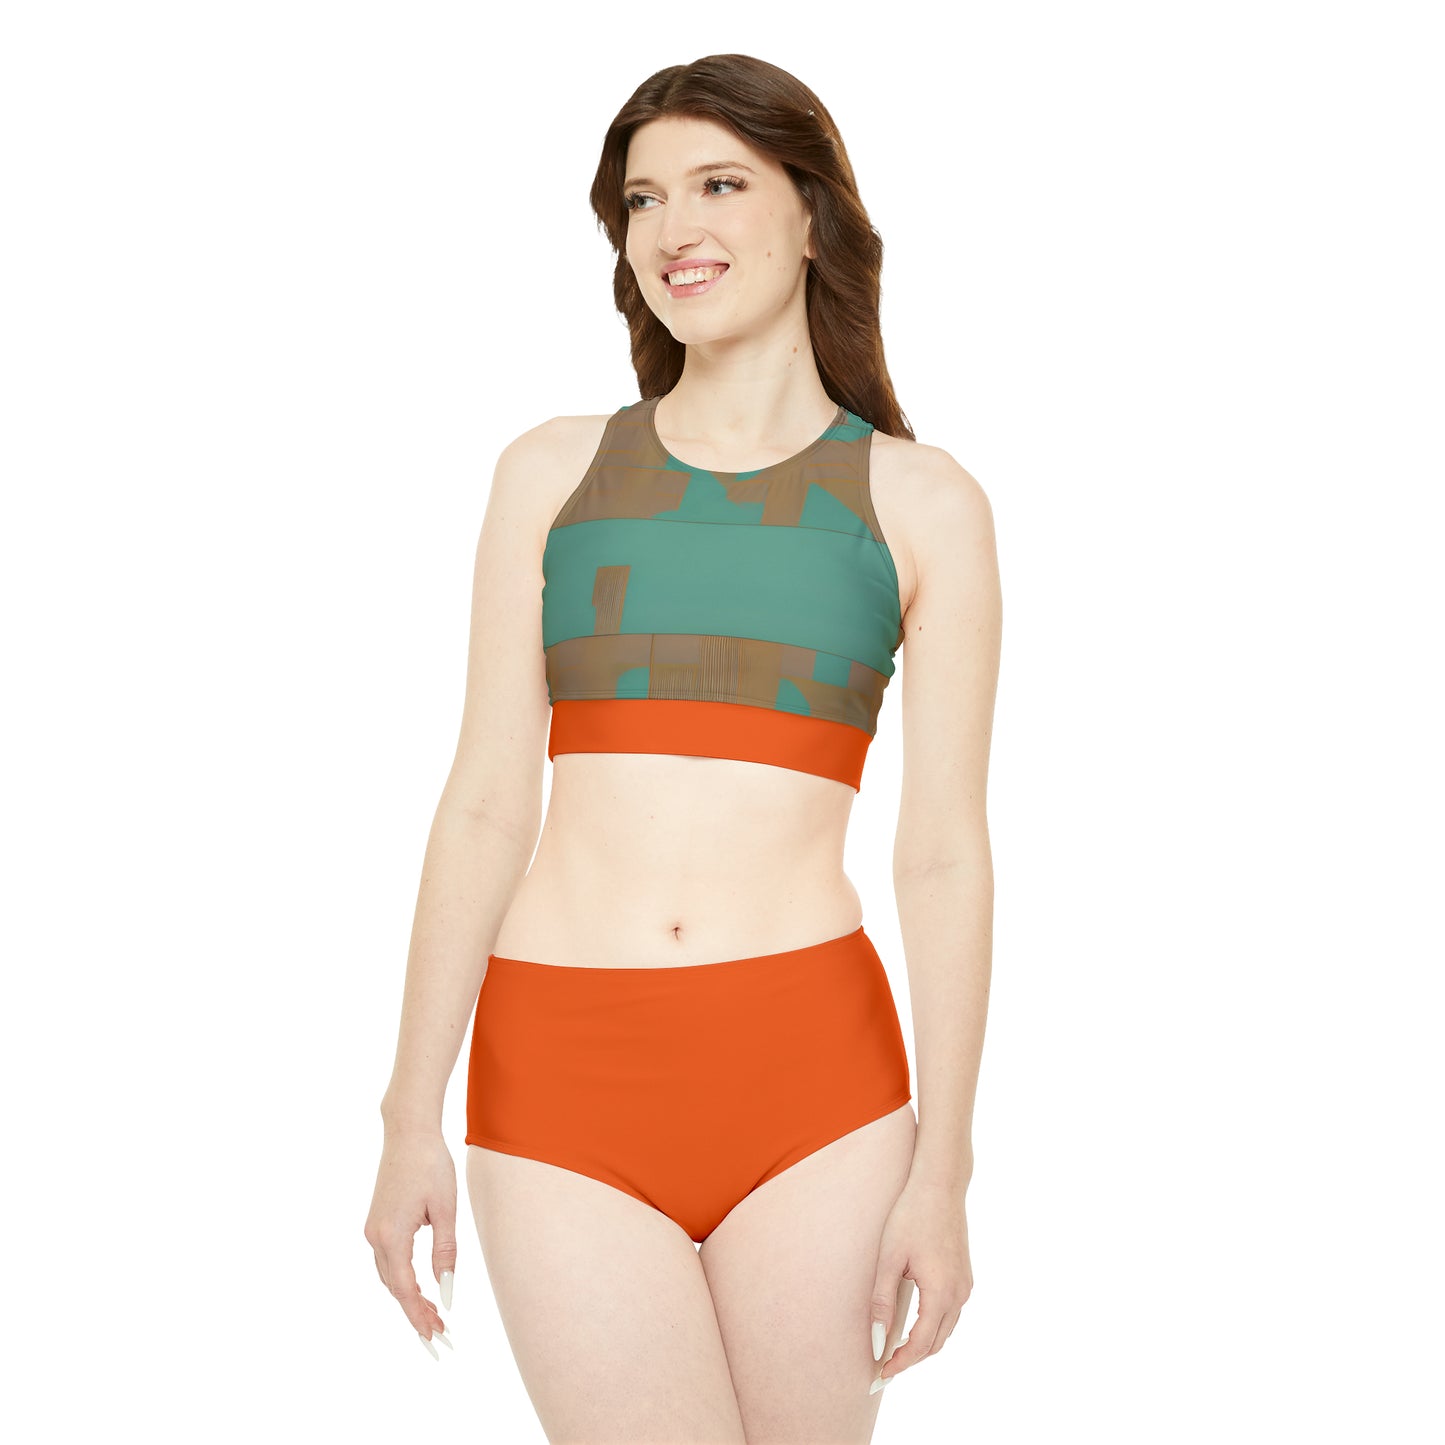 ABSTRACT SHAPES 103 CLEMENTINE - Sporty Bikini Set (AOP)